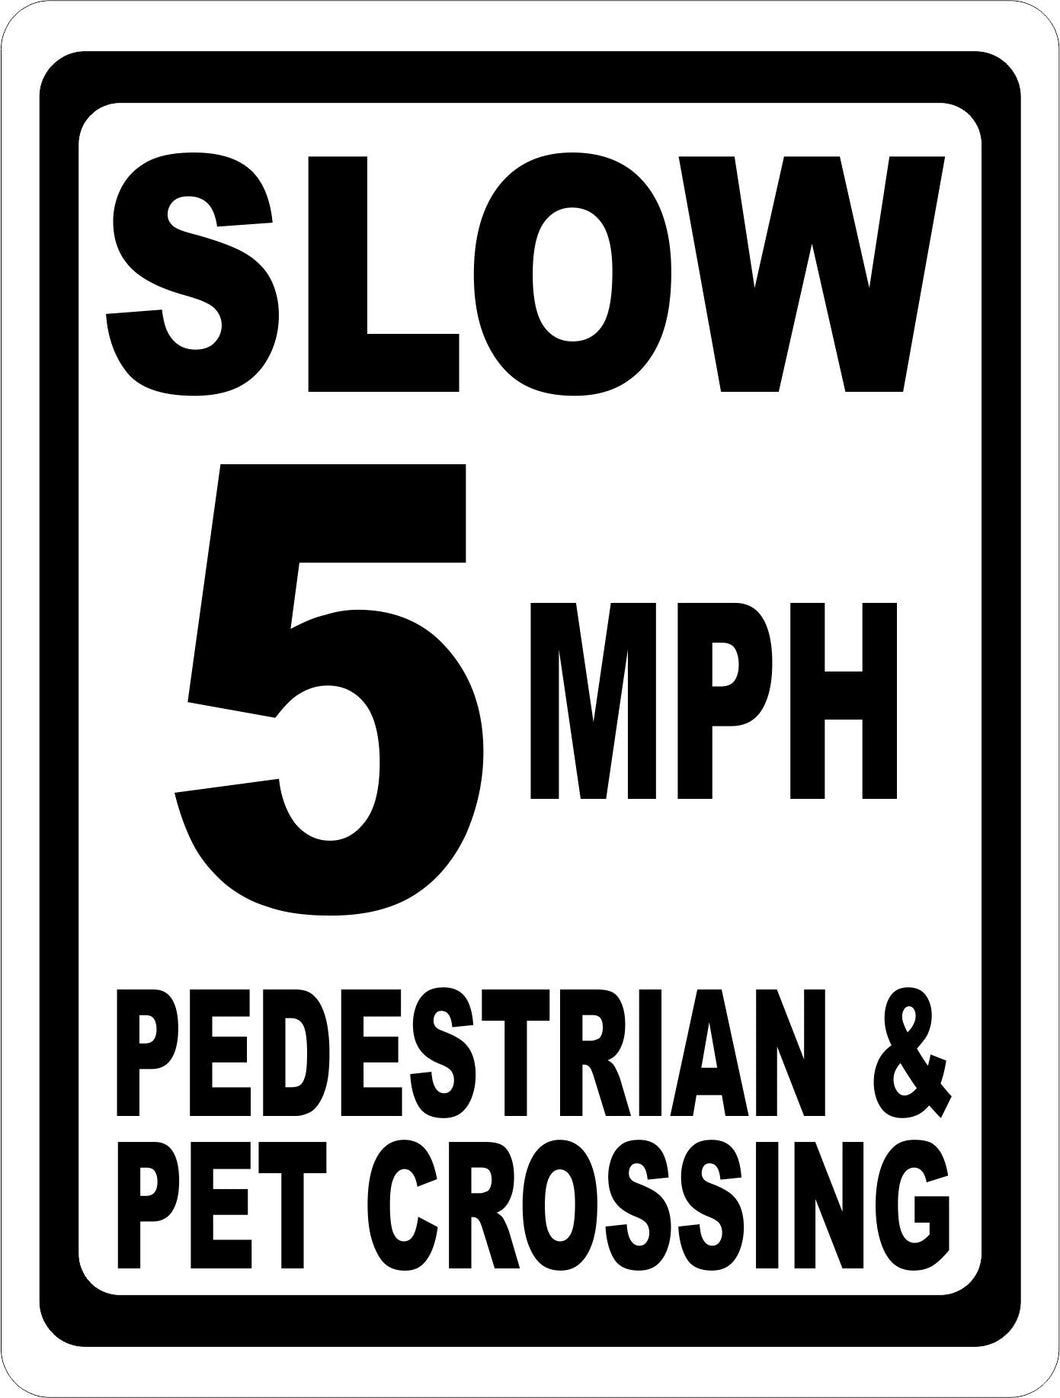 Slow 5 MPH Pedestrian & Pet Crossing Sign - Signs & Decals by SalaGraphics